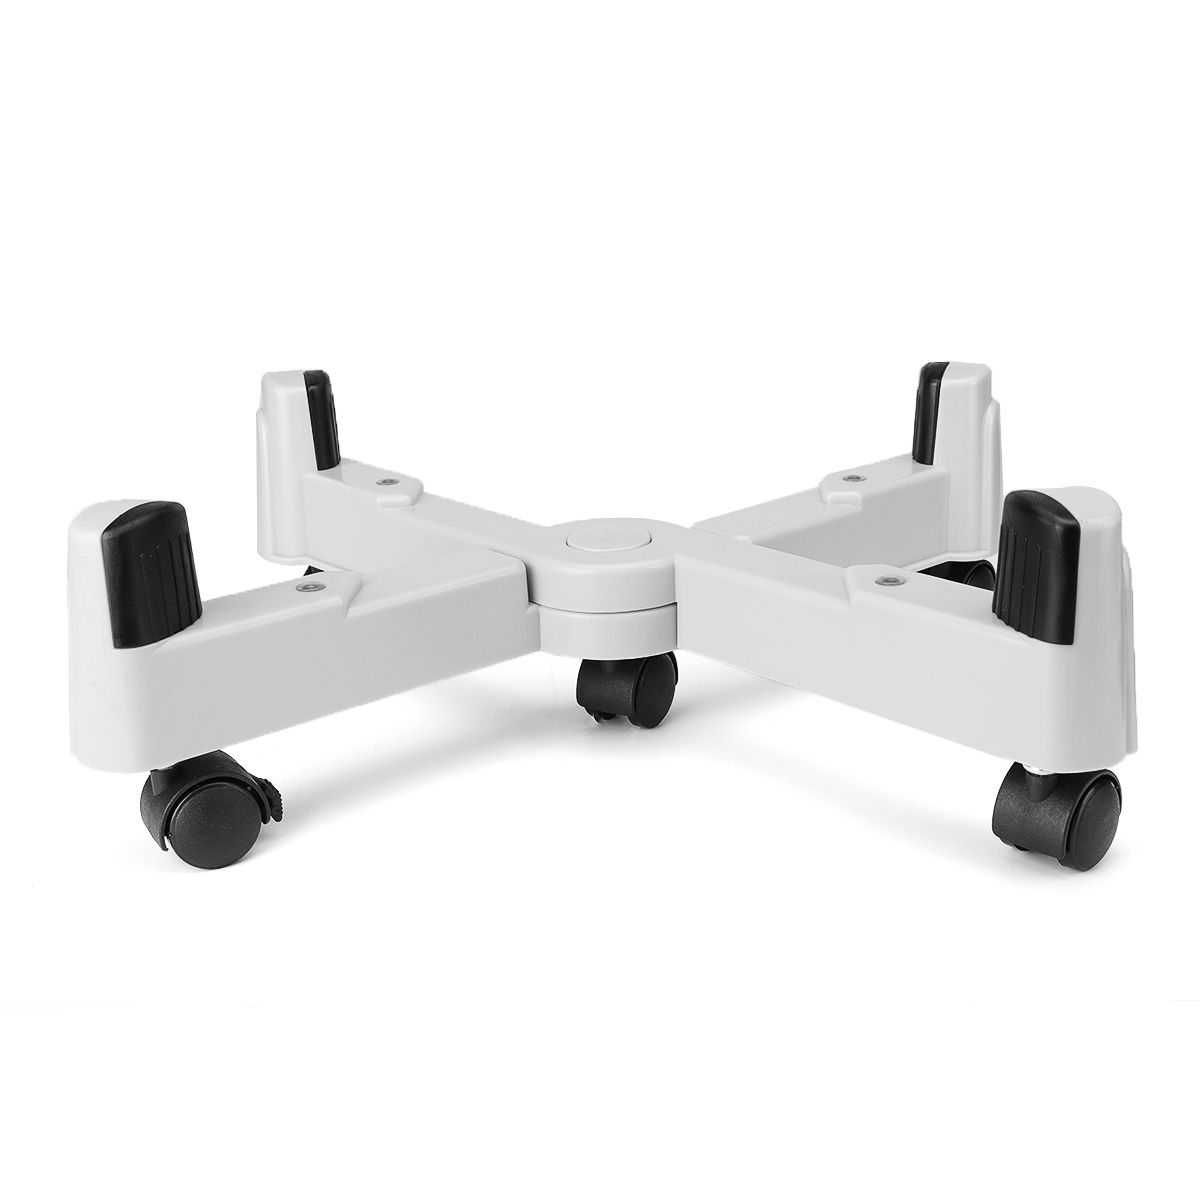 X-shape-PC-Computer-CPU-Stand-Tower-Holder-Computer-Case-Stand-with-Swivel-Mobile-CastorsWheels-Adju-1636460